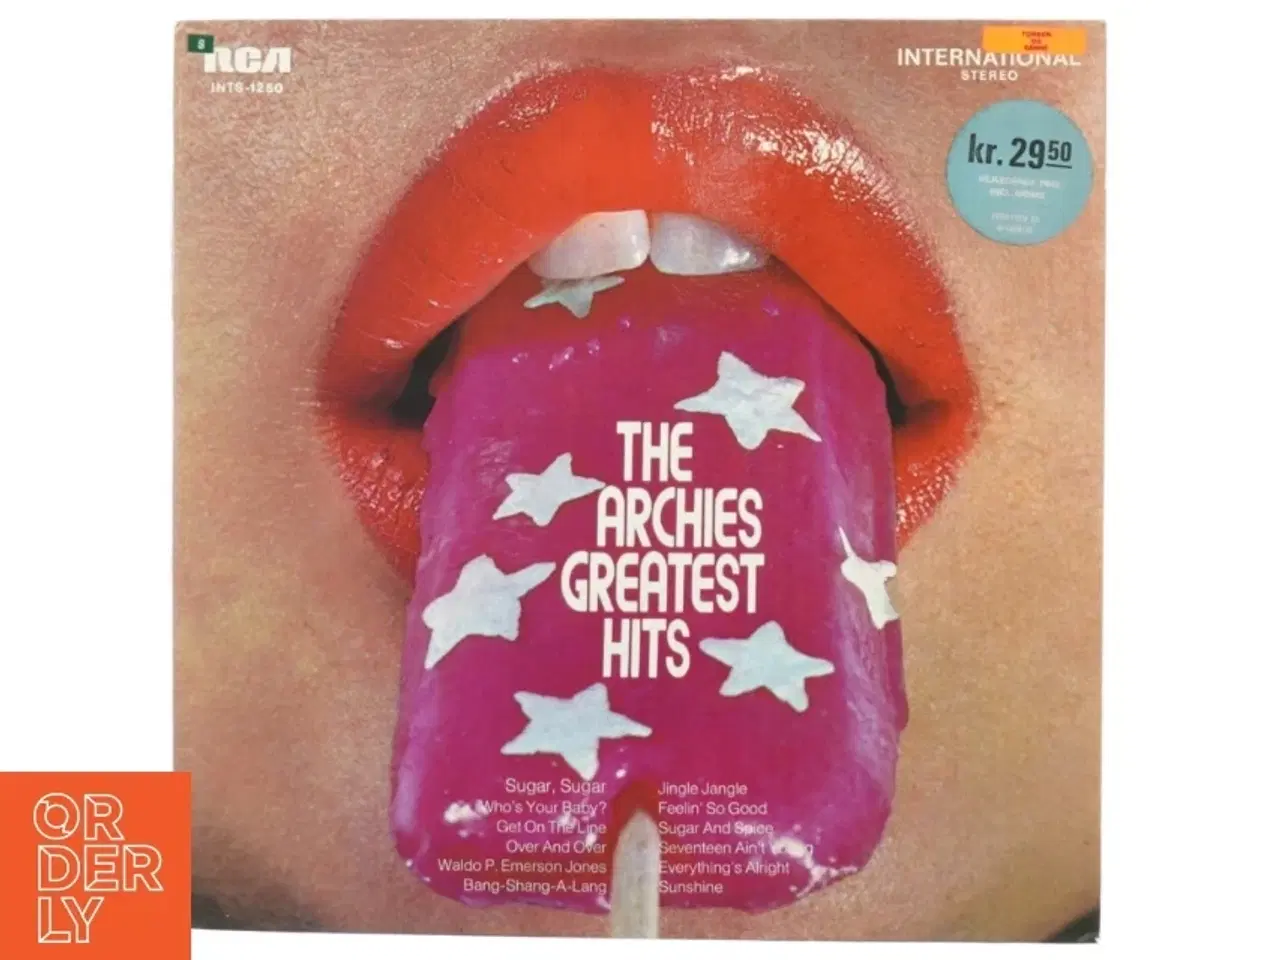 Billede 1 - The archies greatest hits fra Rca (str. 30 cm)